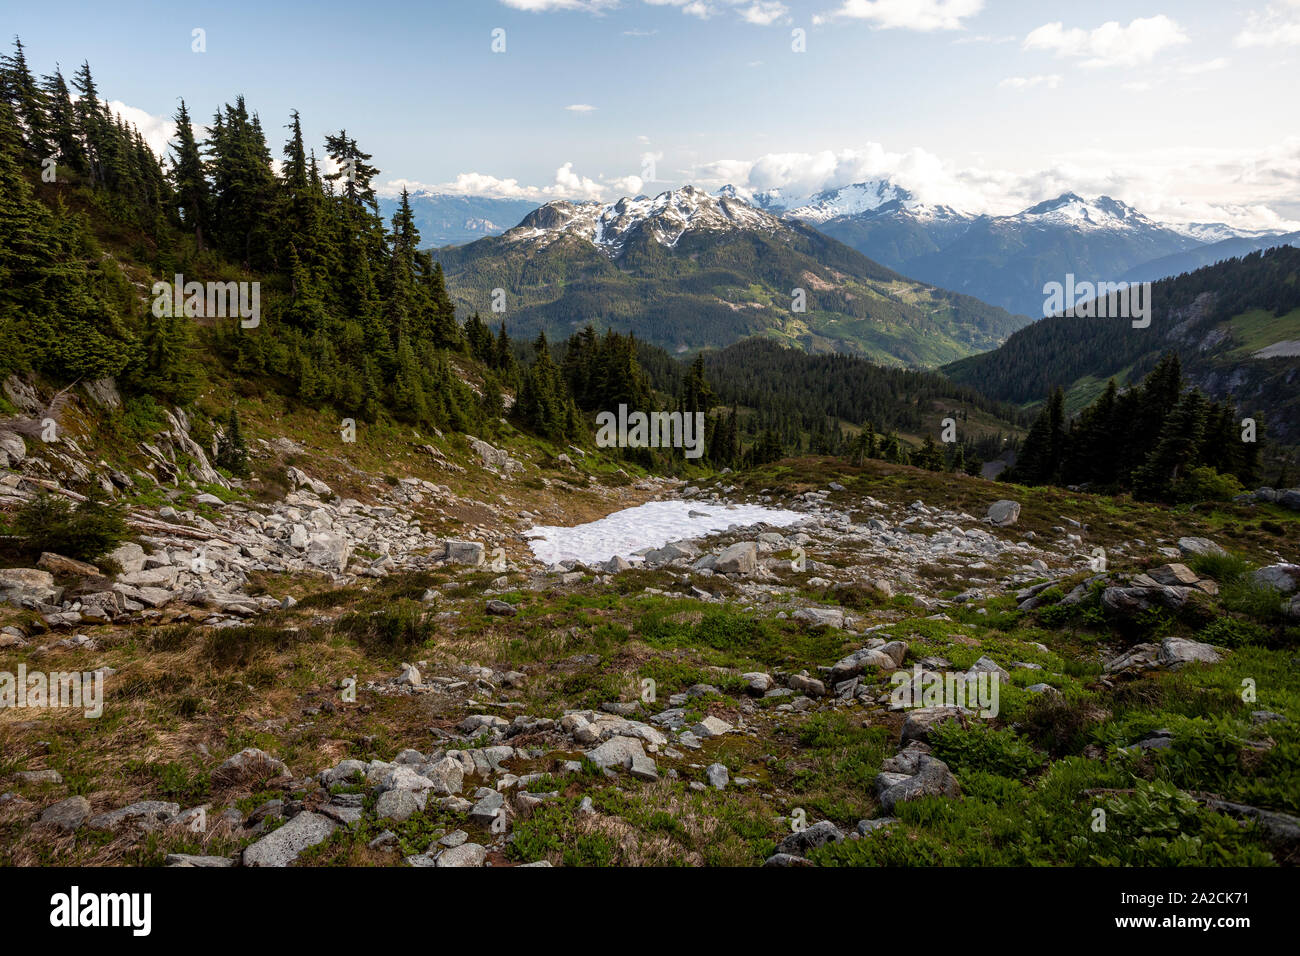 Scenic summer view of the coast mountains of British Columbia. Stock Photo